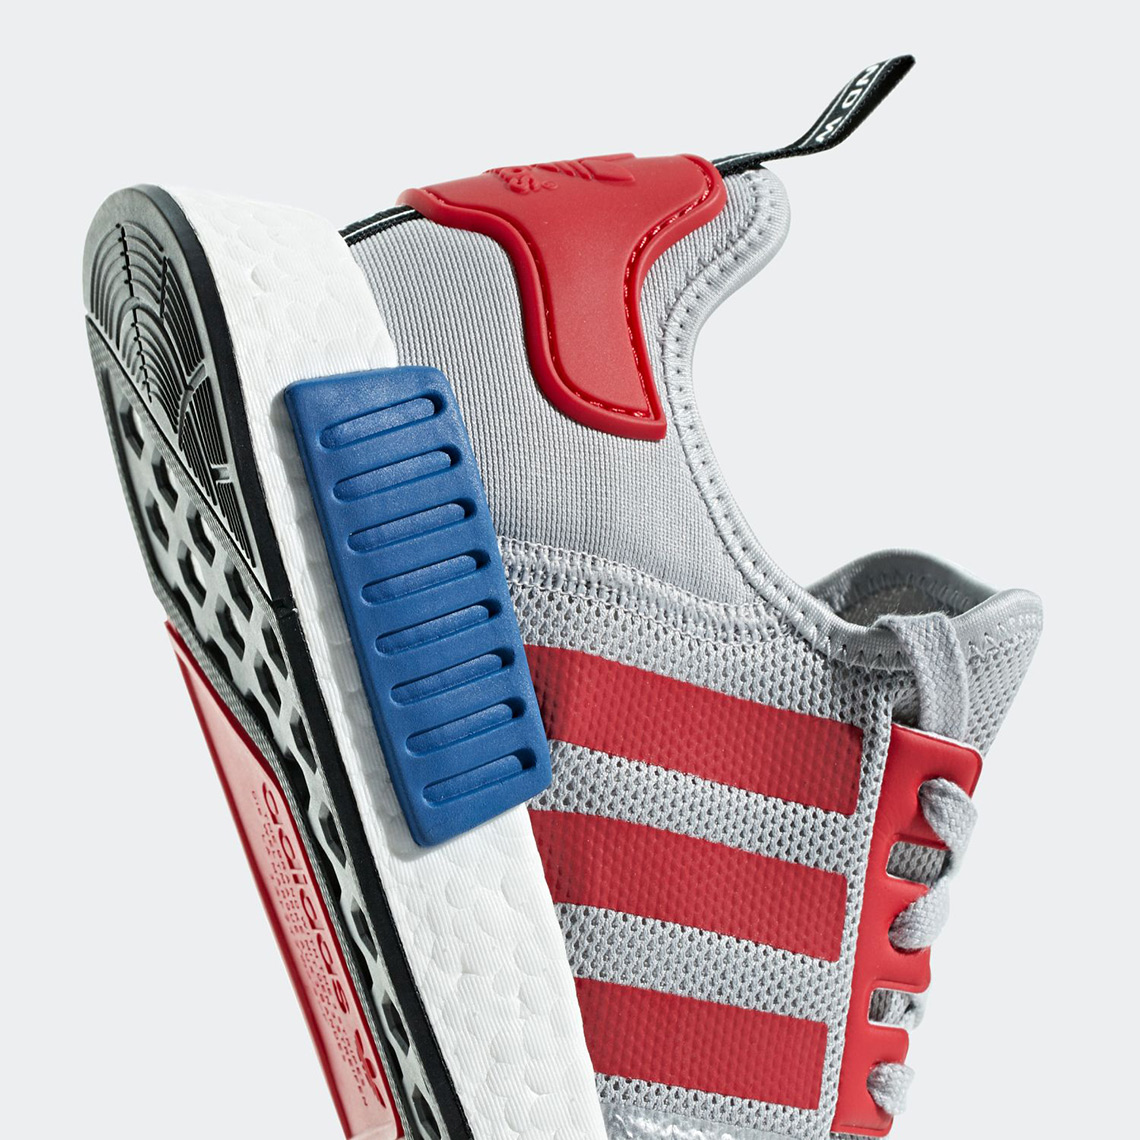 Adidas Nmd R1 Micropacer F99714 2